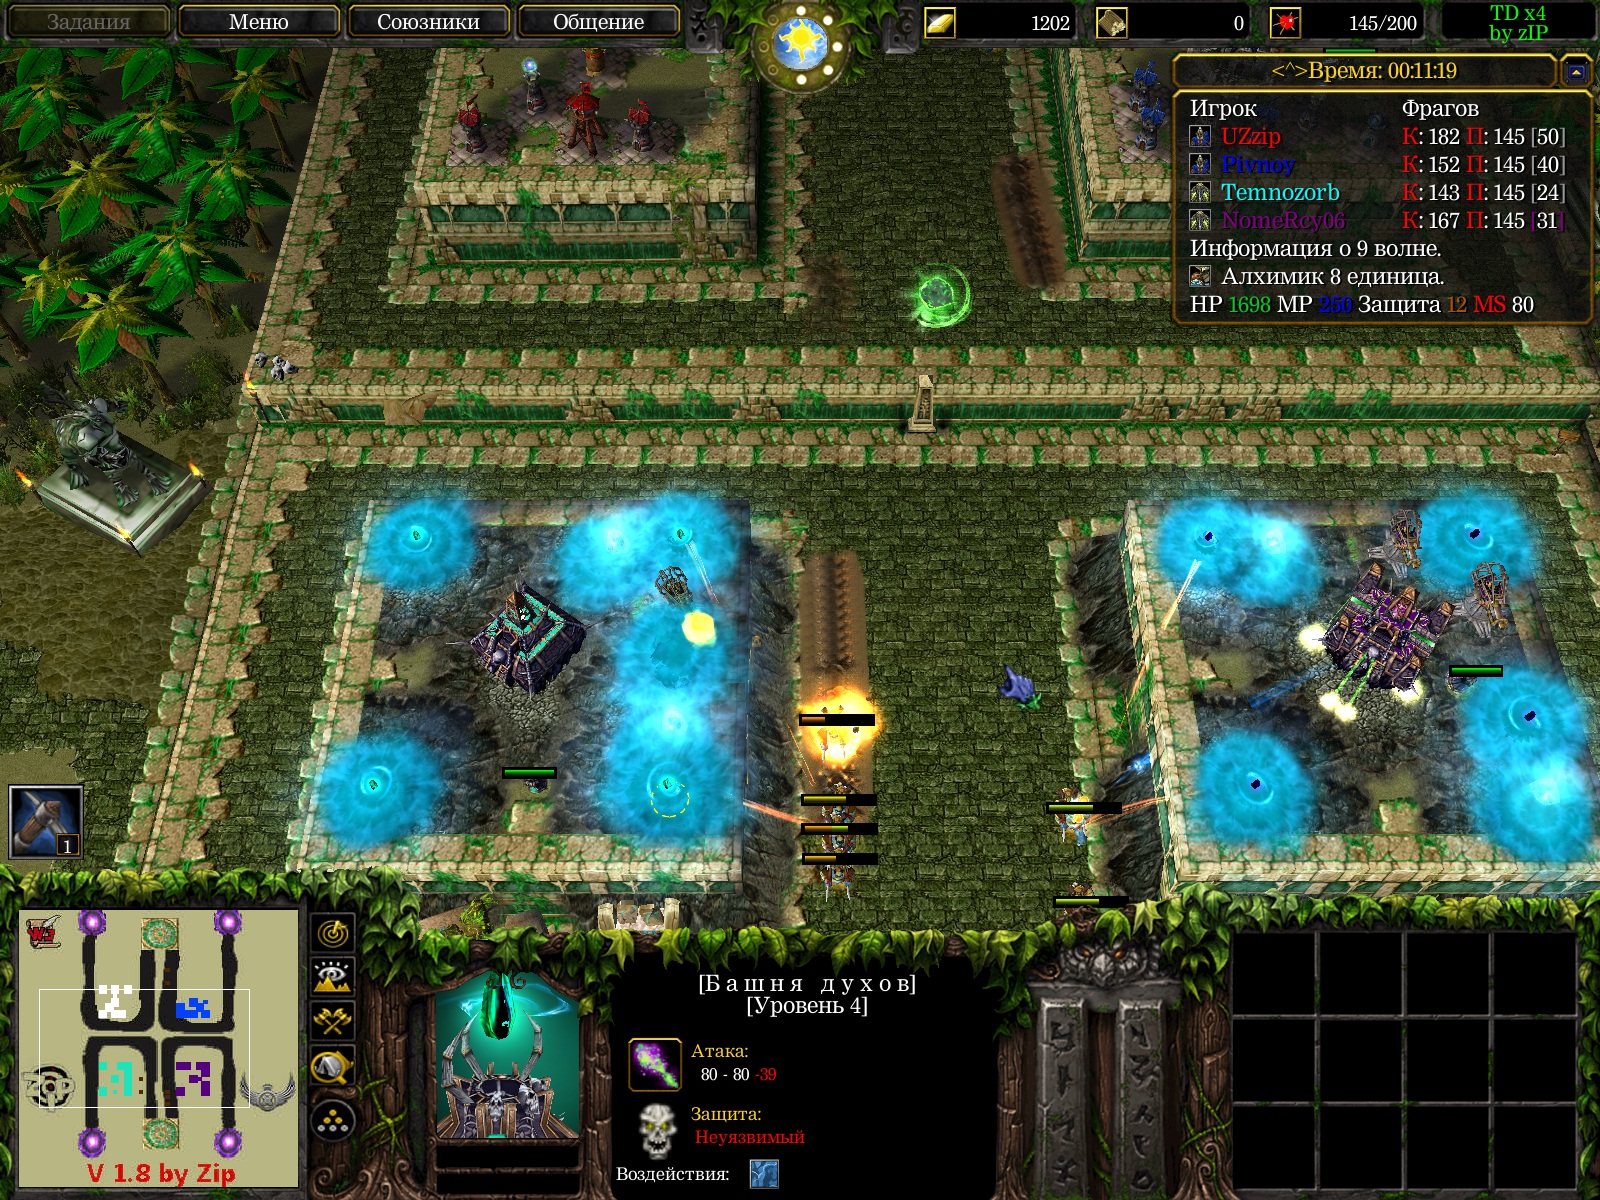 Warcraft 3 Tower Defense башни. Stronghold td Warcraft 3. Варкрафт 3 игра. Tower Defense x.